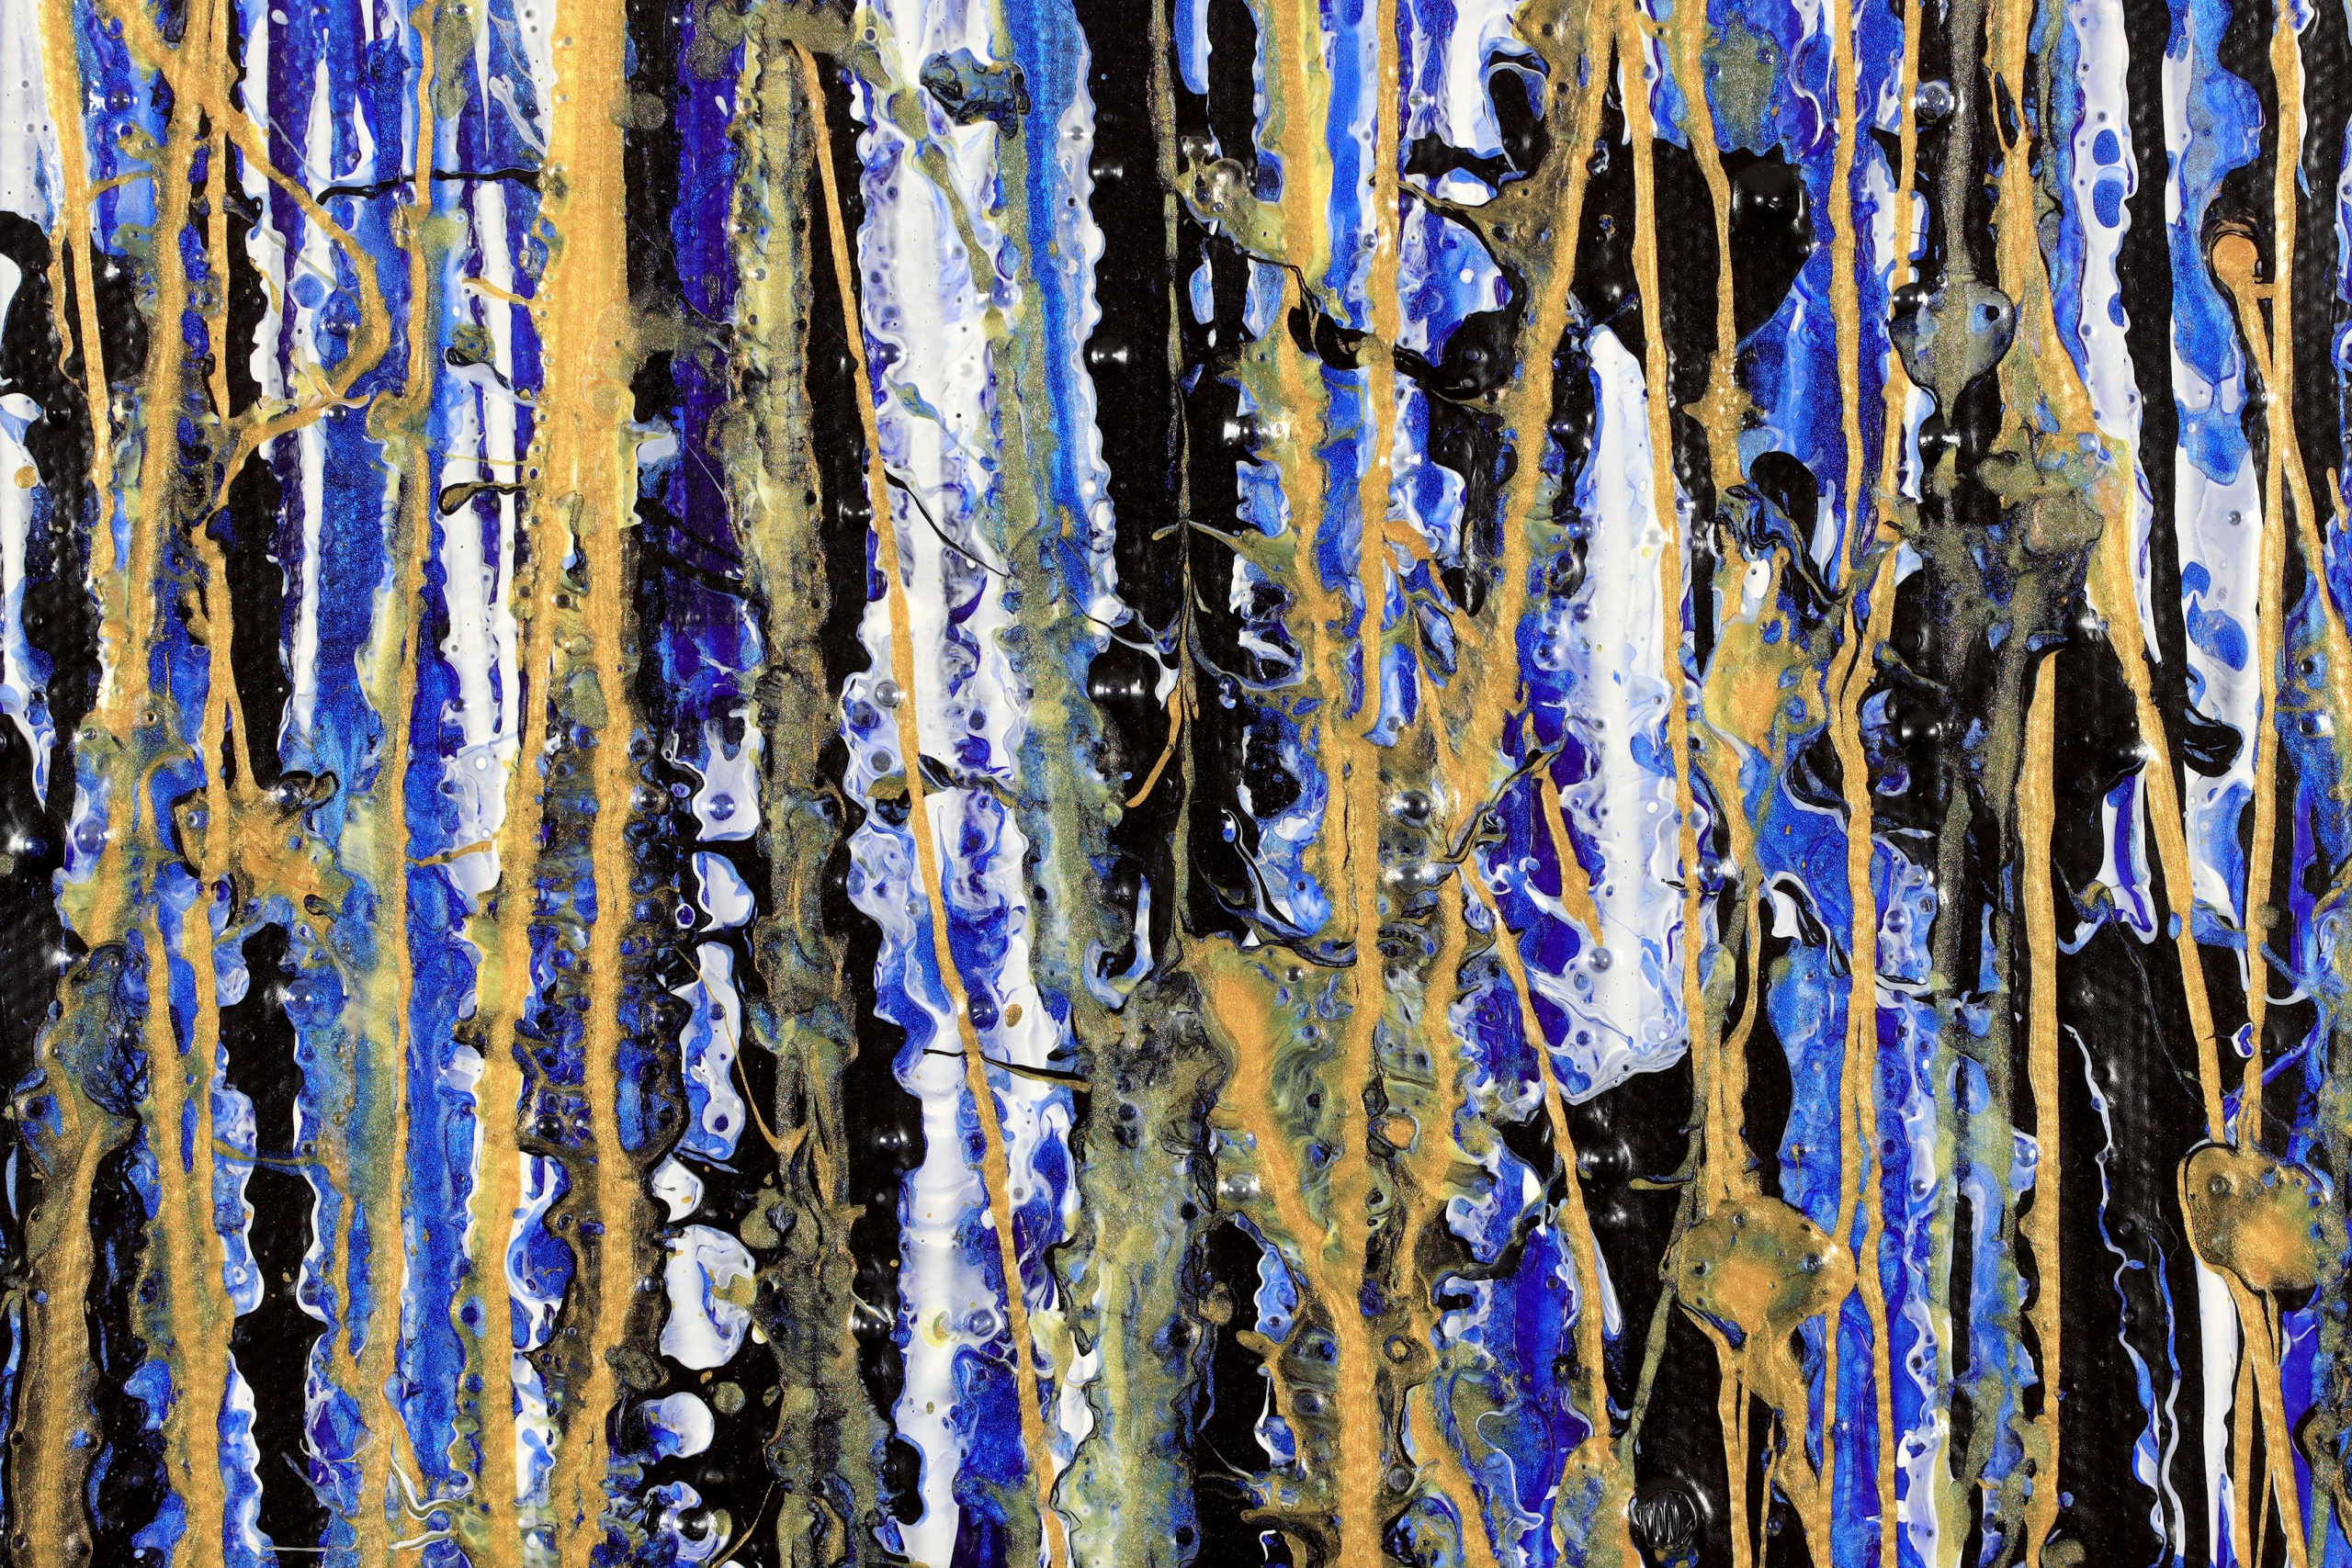 DETAIL / Sparks (Over Iridescent Blue) / 30x40 inches / Nestor Toro